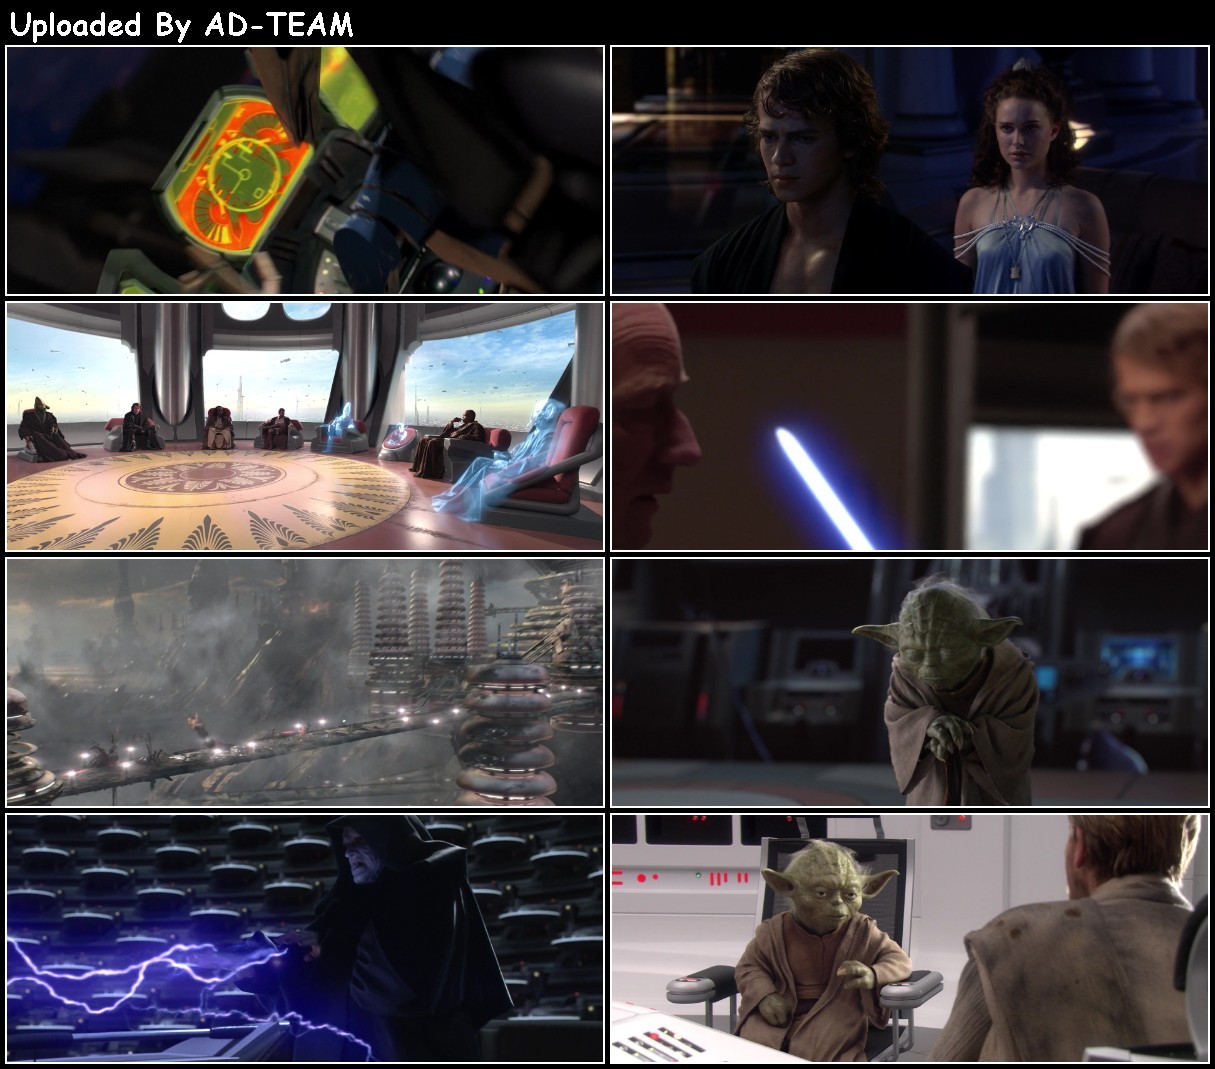 Star Wars Episode III Revenge of The Sith 2005 REMASTERED 1080p BluRay H264 AAC-RARBG FBMwJHPE_o